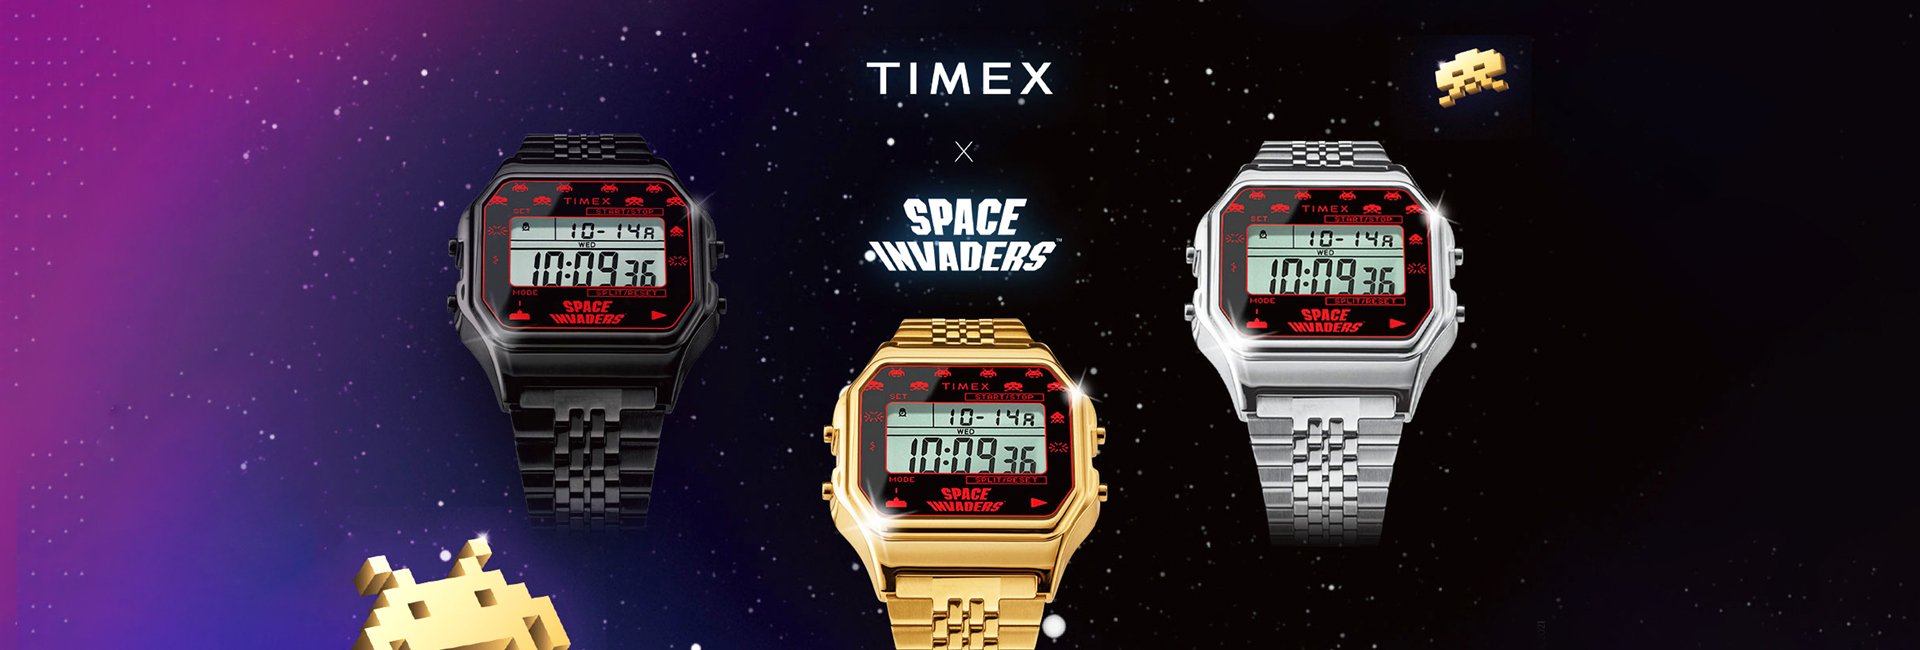 timex space invaders